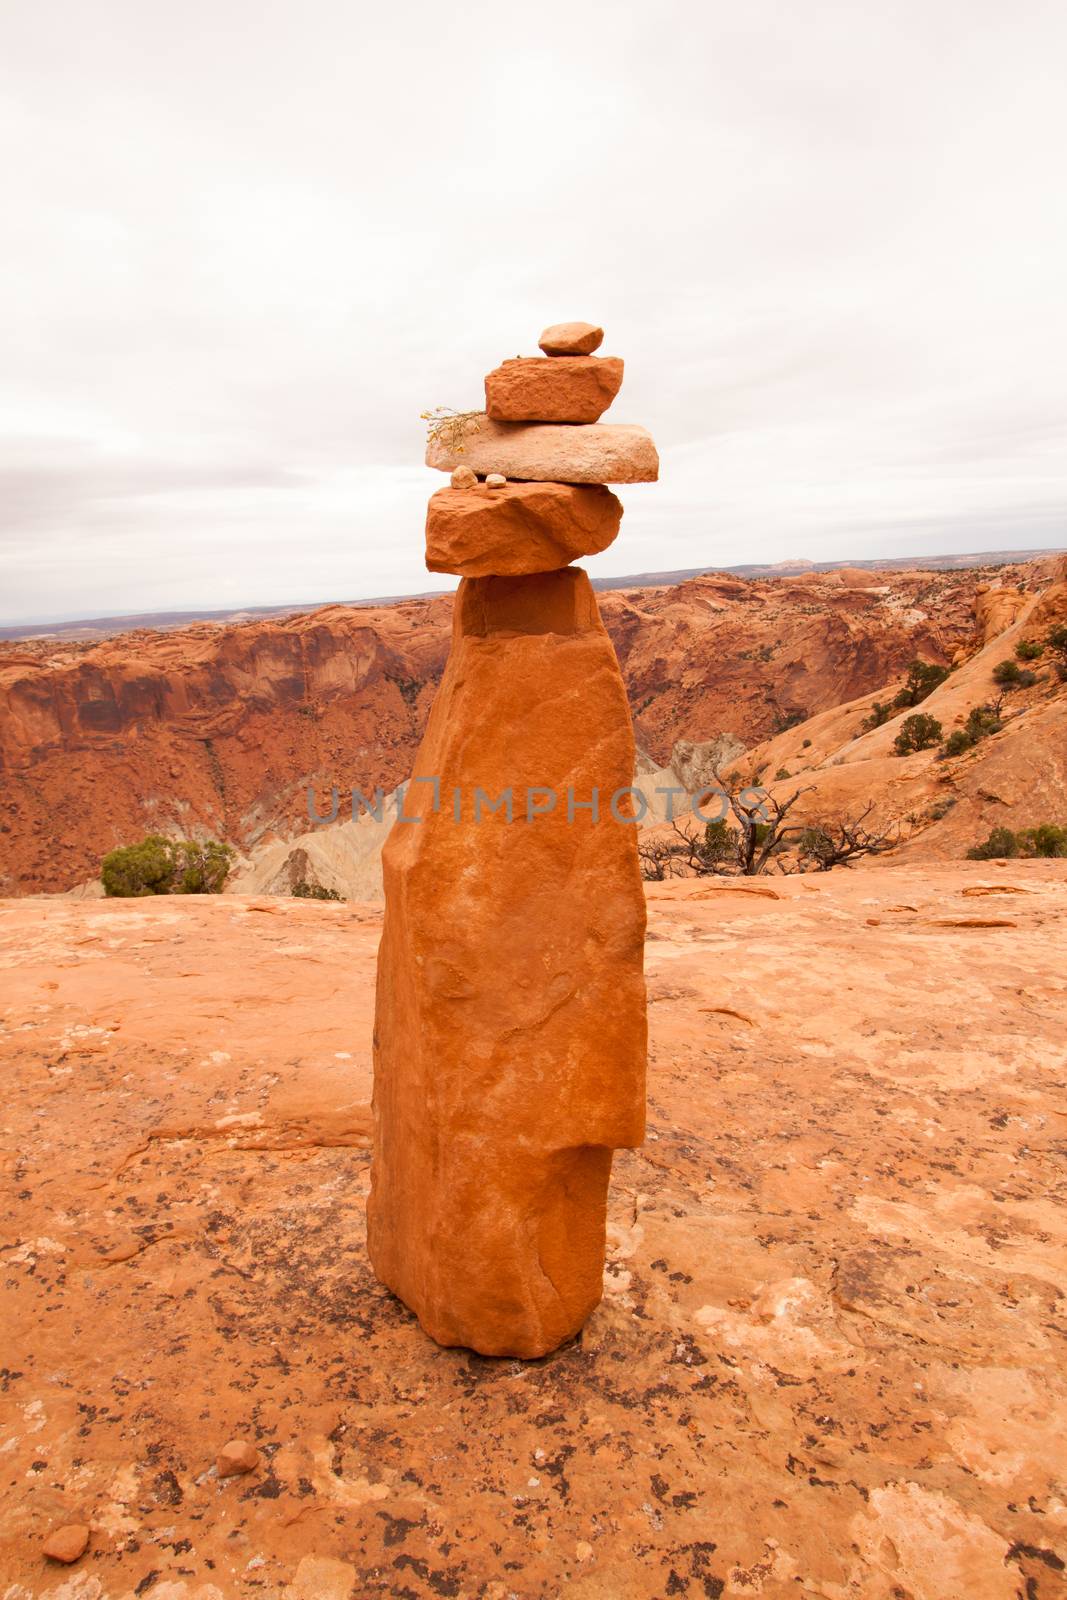 Rock cairn marking a trail near Upheaval Dome in Canyonlands National Park, Utah.